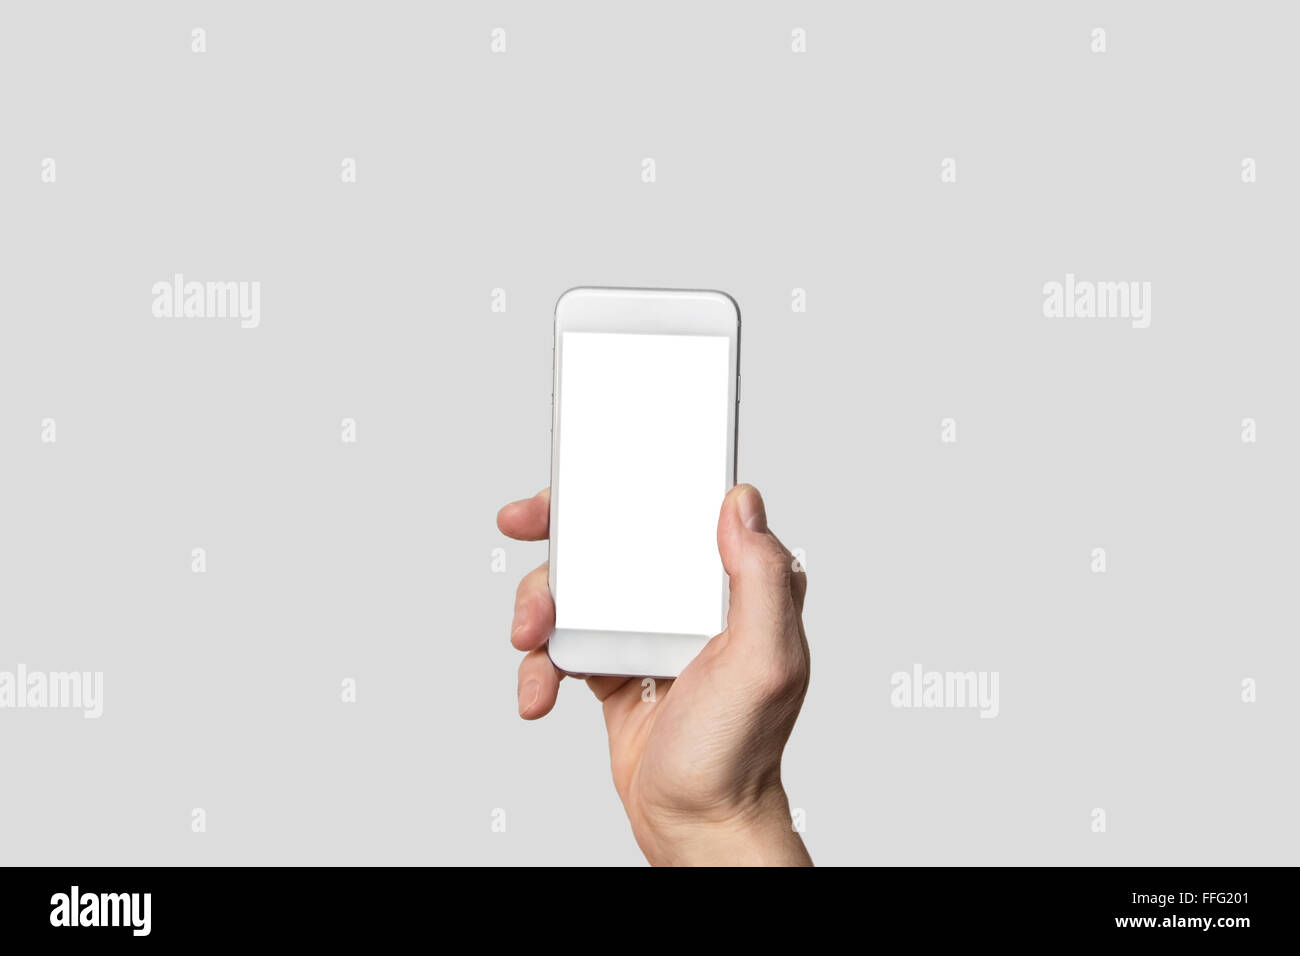 Hand holding modern smartphone in front of isolated background and blank touch screen Stock Photo